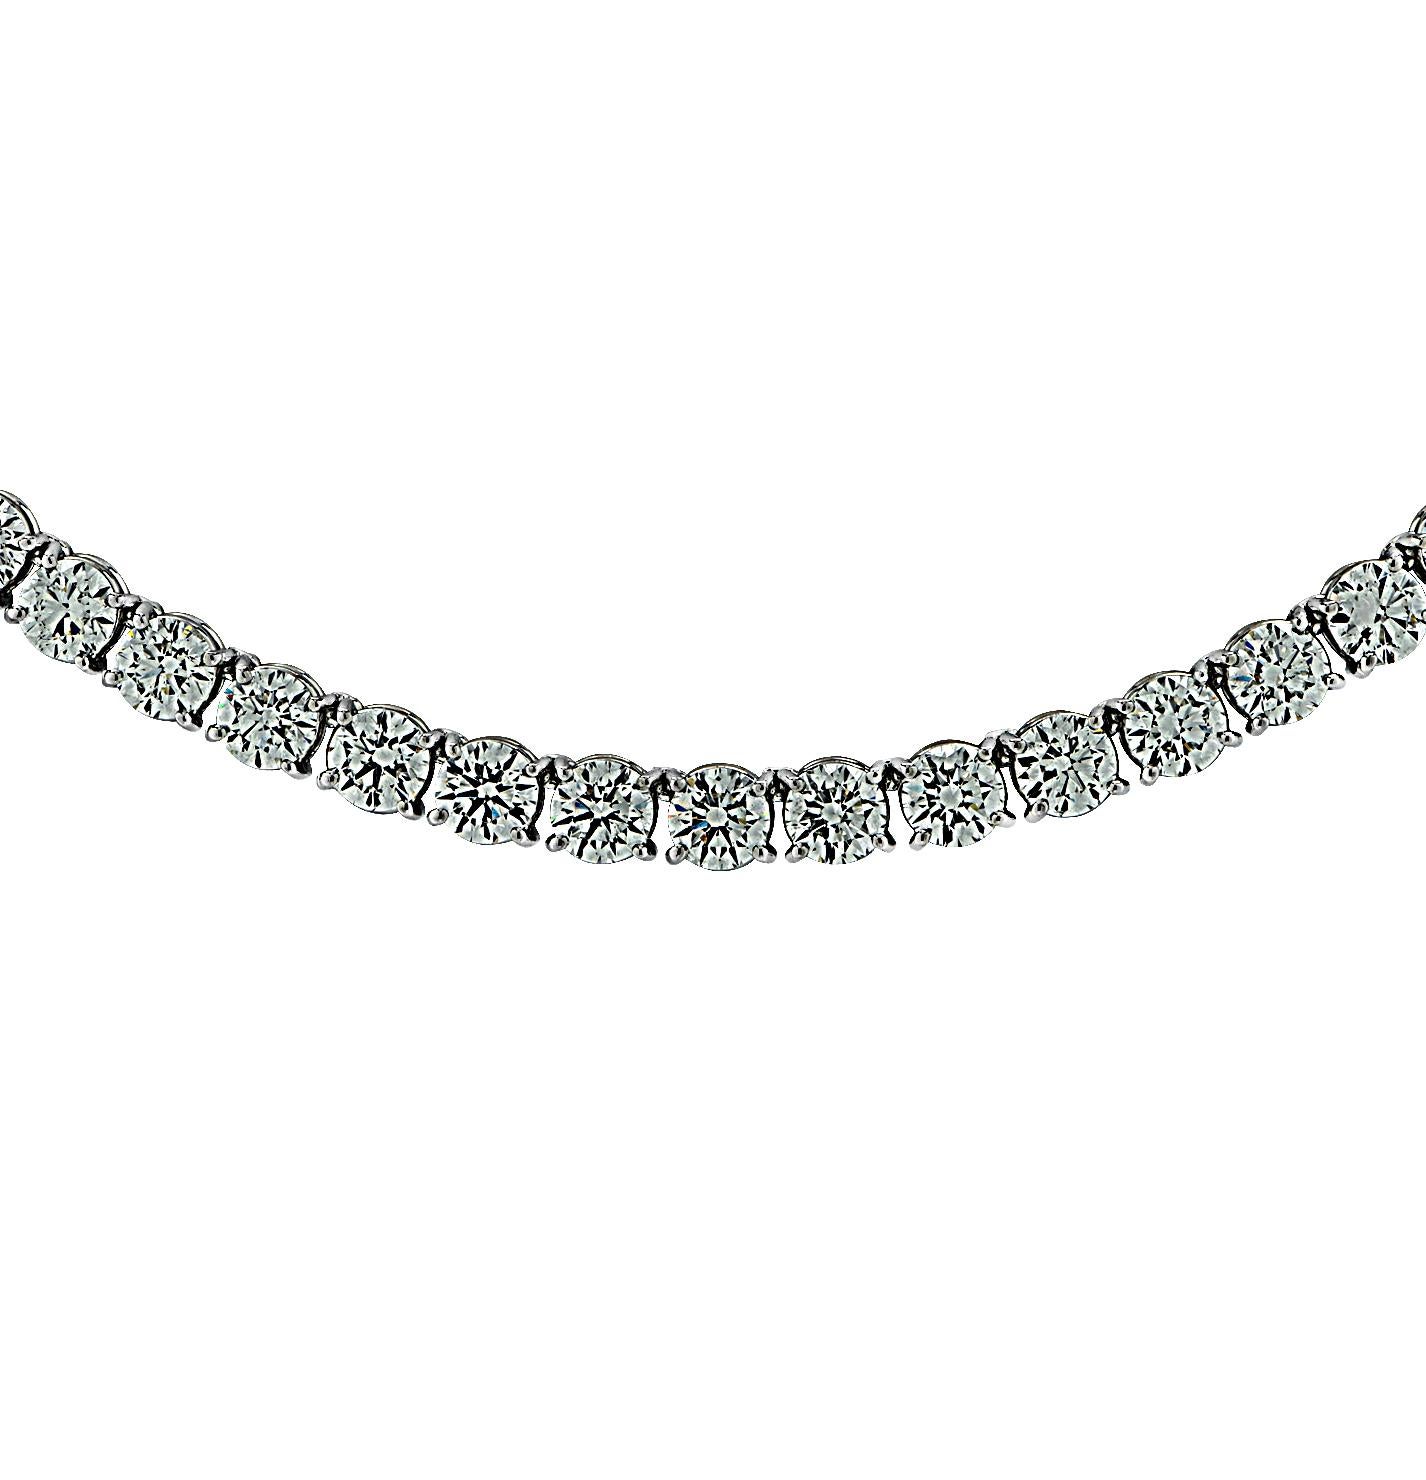 Sensational Vivid Diamonds Straight Line diamond tennis necklace crafted in platinum, showcasing 80 spectacular GIA certified round brilliant cut diamonds weighing 32 carats total, F color, VS-SI Clarity. Each GIA certified diamond was carefully